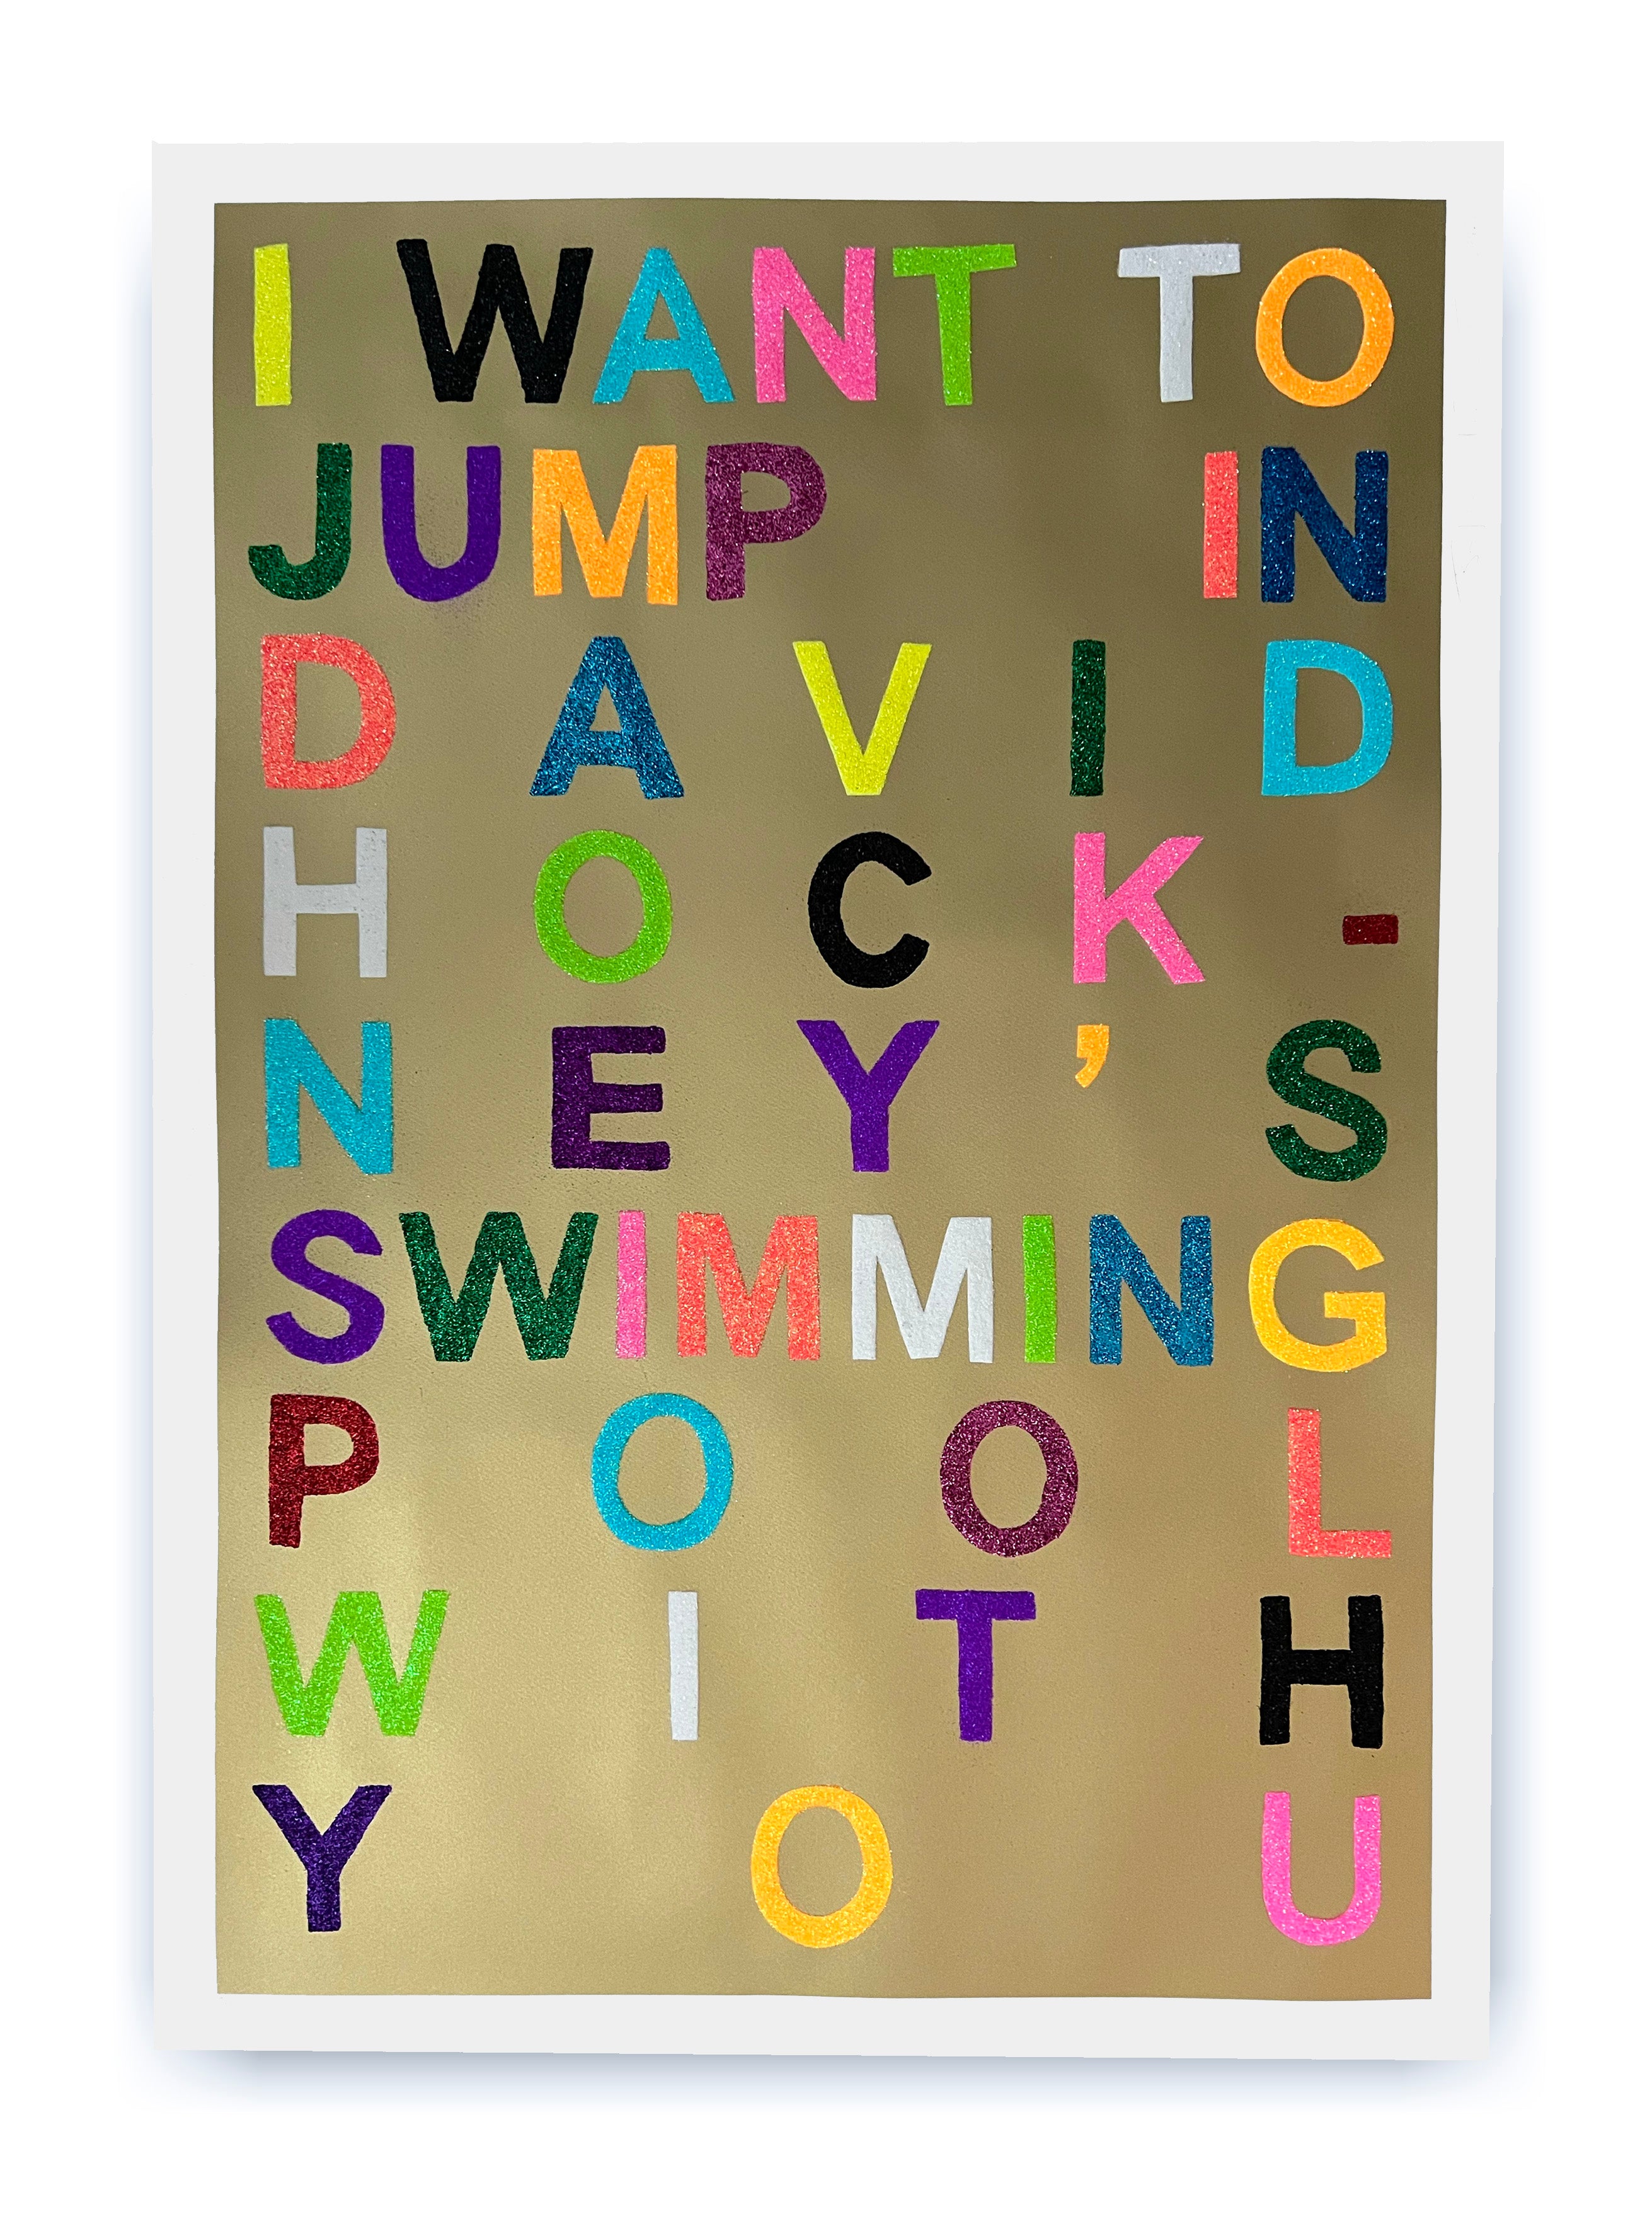 Image of I Want To Jump In David Hockney's Swimming Pool With You, Glitter artwork by Benjamin Thomas Taylor, free delivery